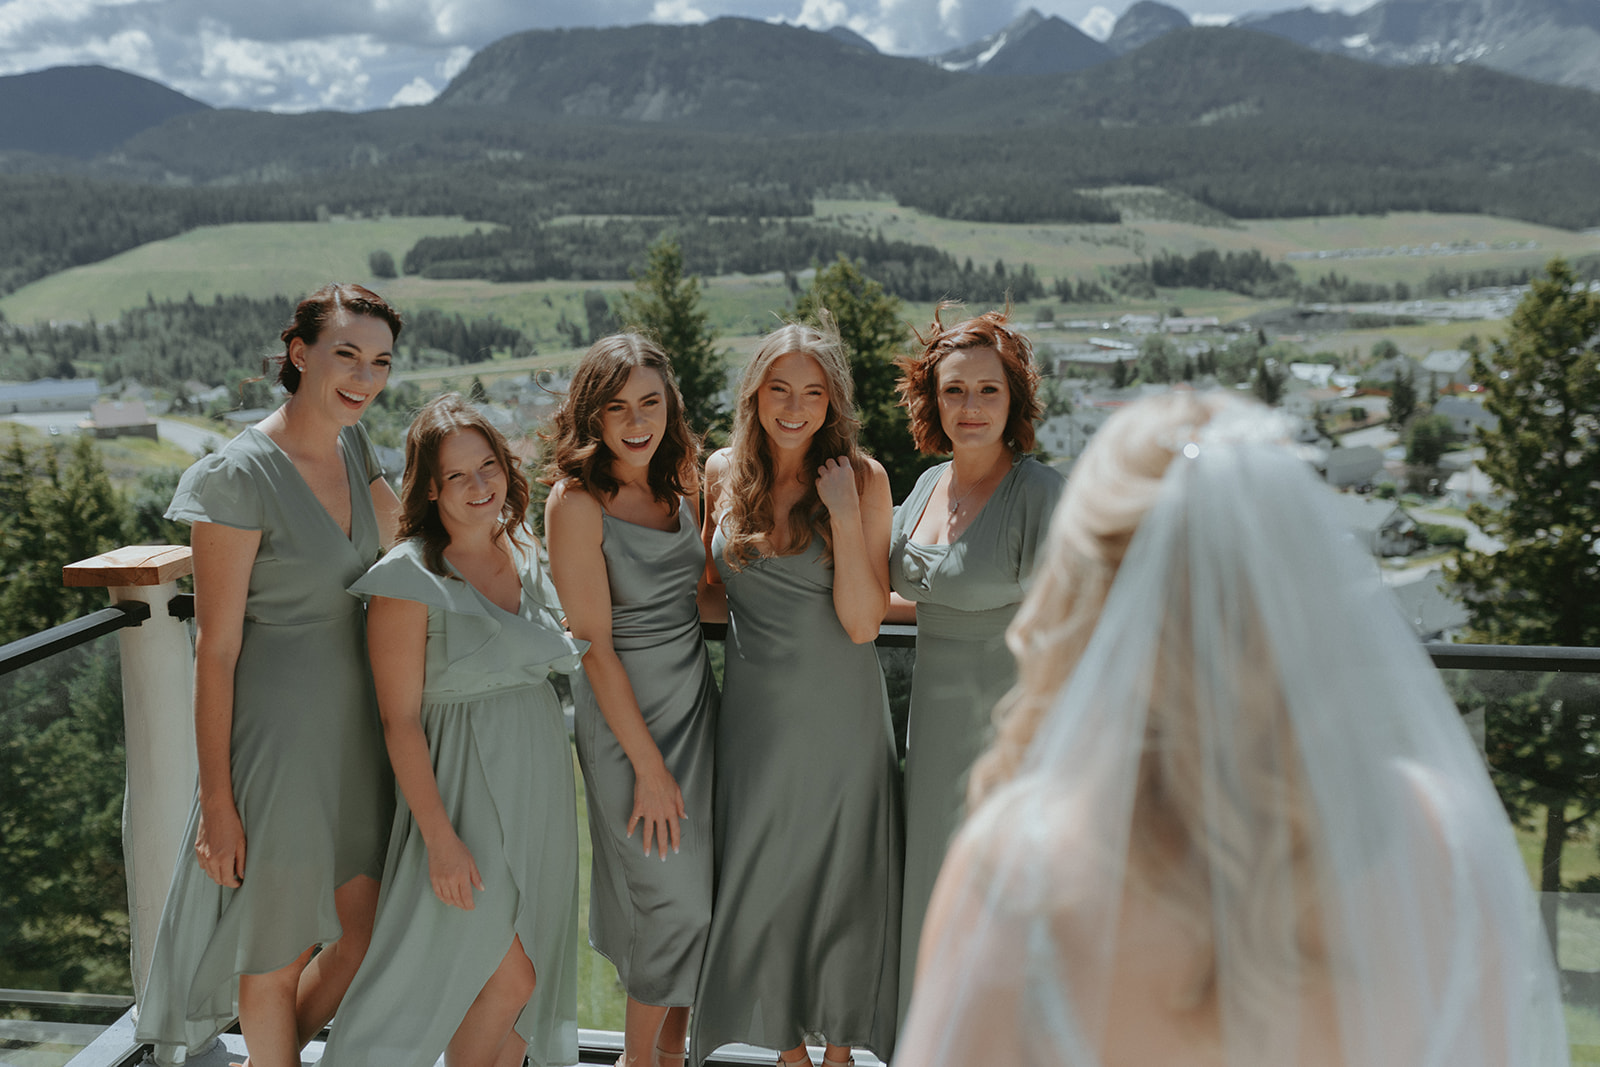 Bridal party first look in a mountain wedding. Sage Green mismatched bridesmaid dresses in this sage wedding inspiration